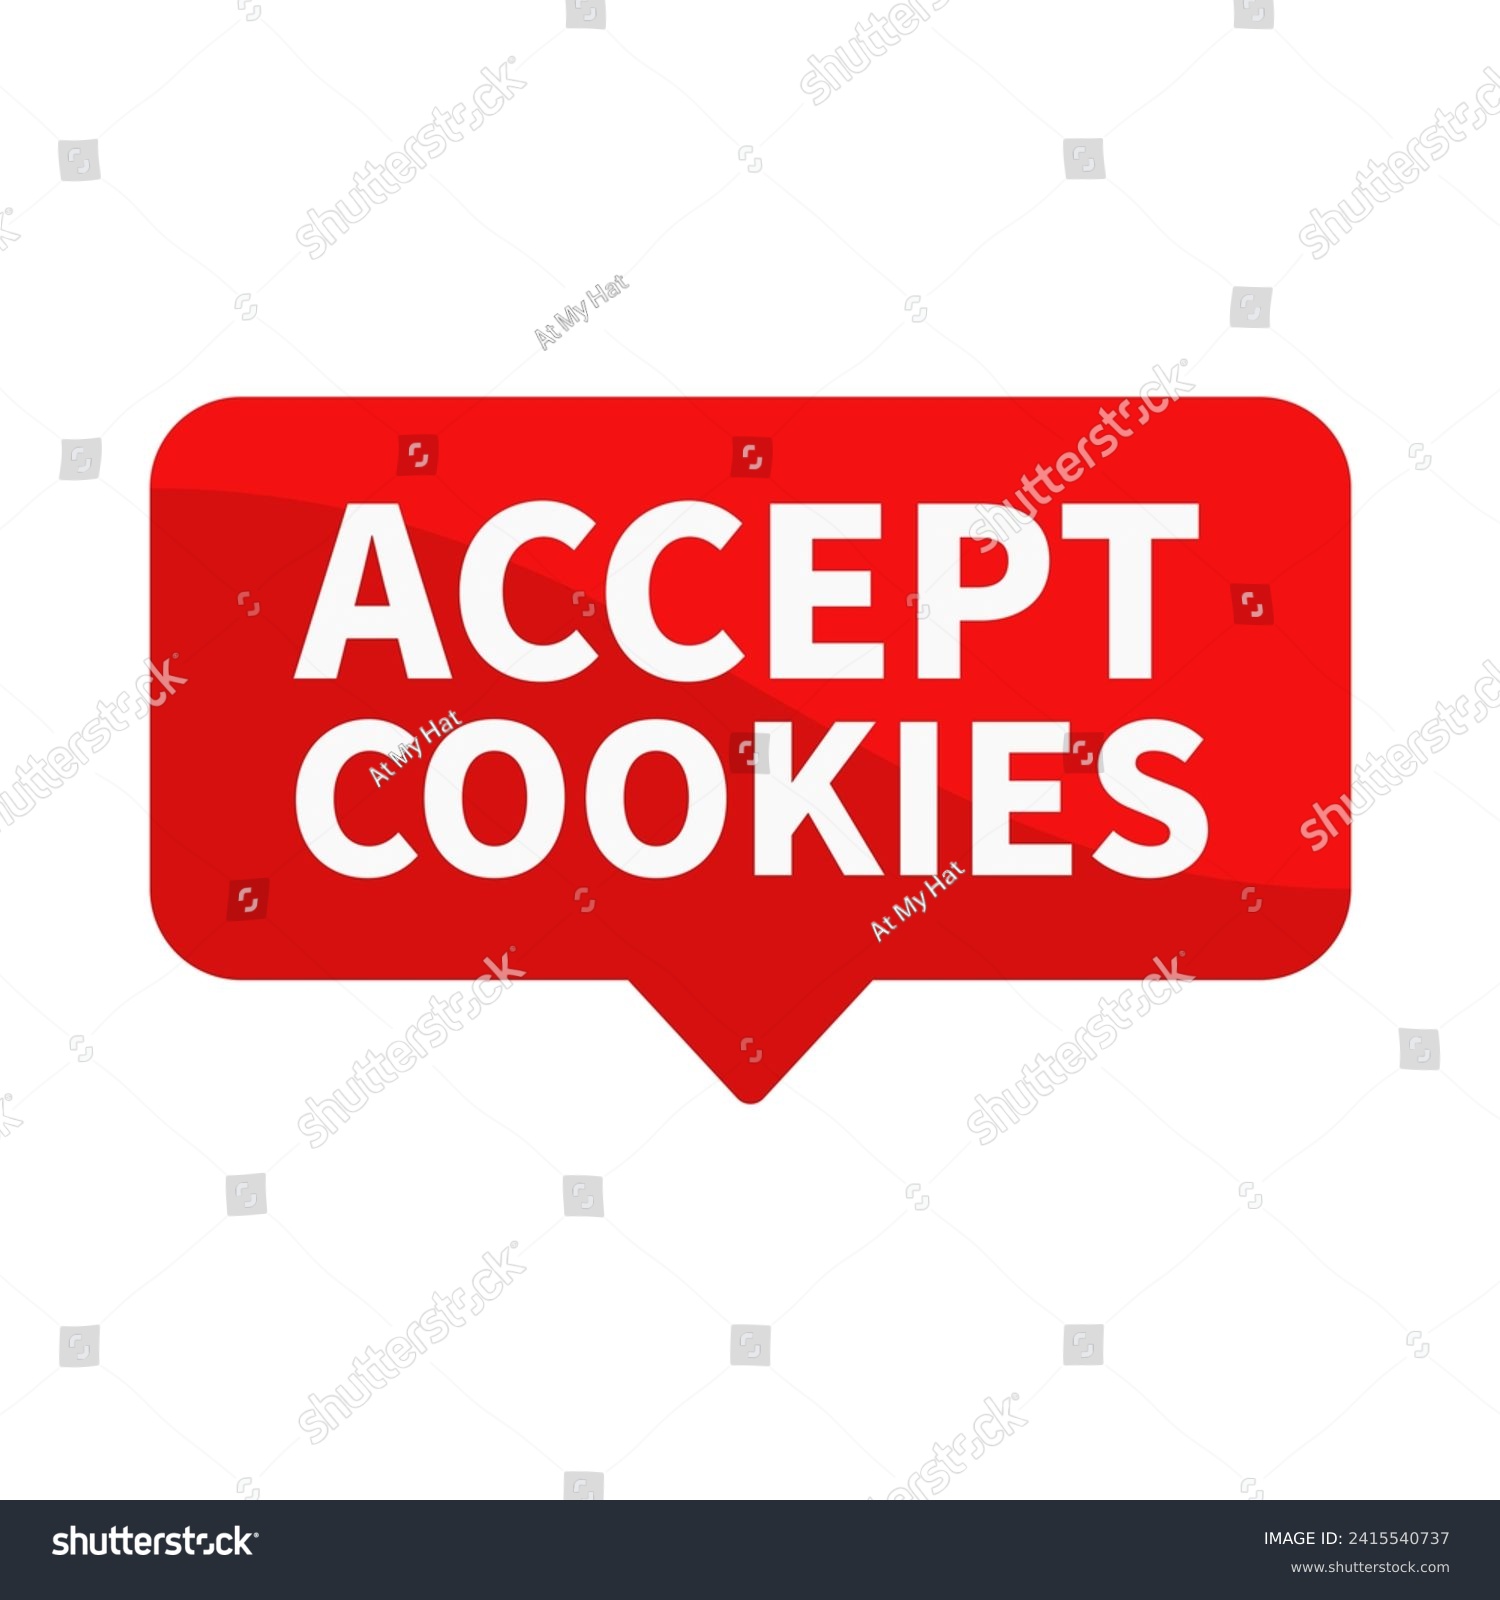 SVG of Accept Cookies Red Rectangle Shape For Sign Information Website Security
 svg